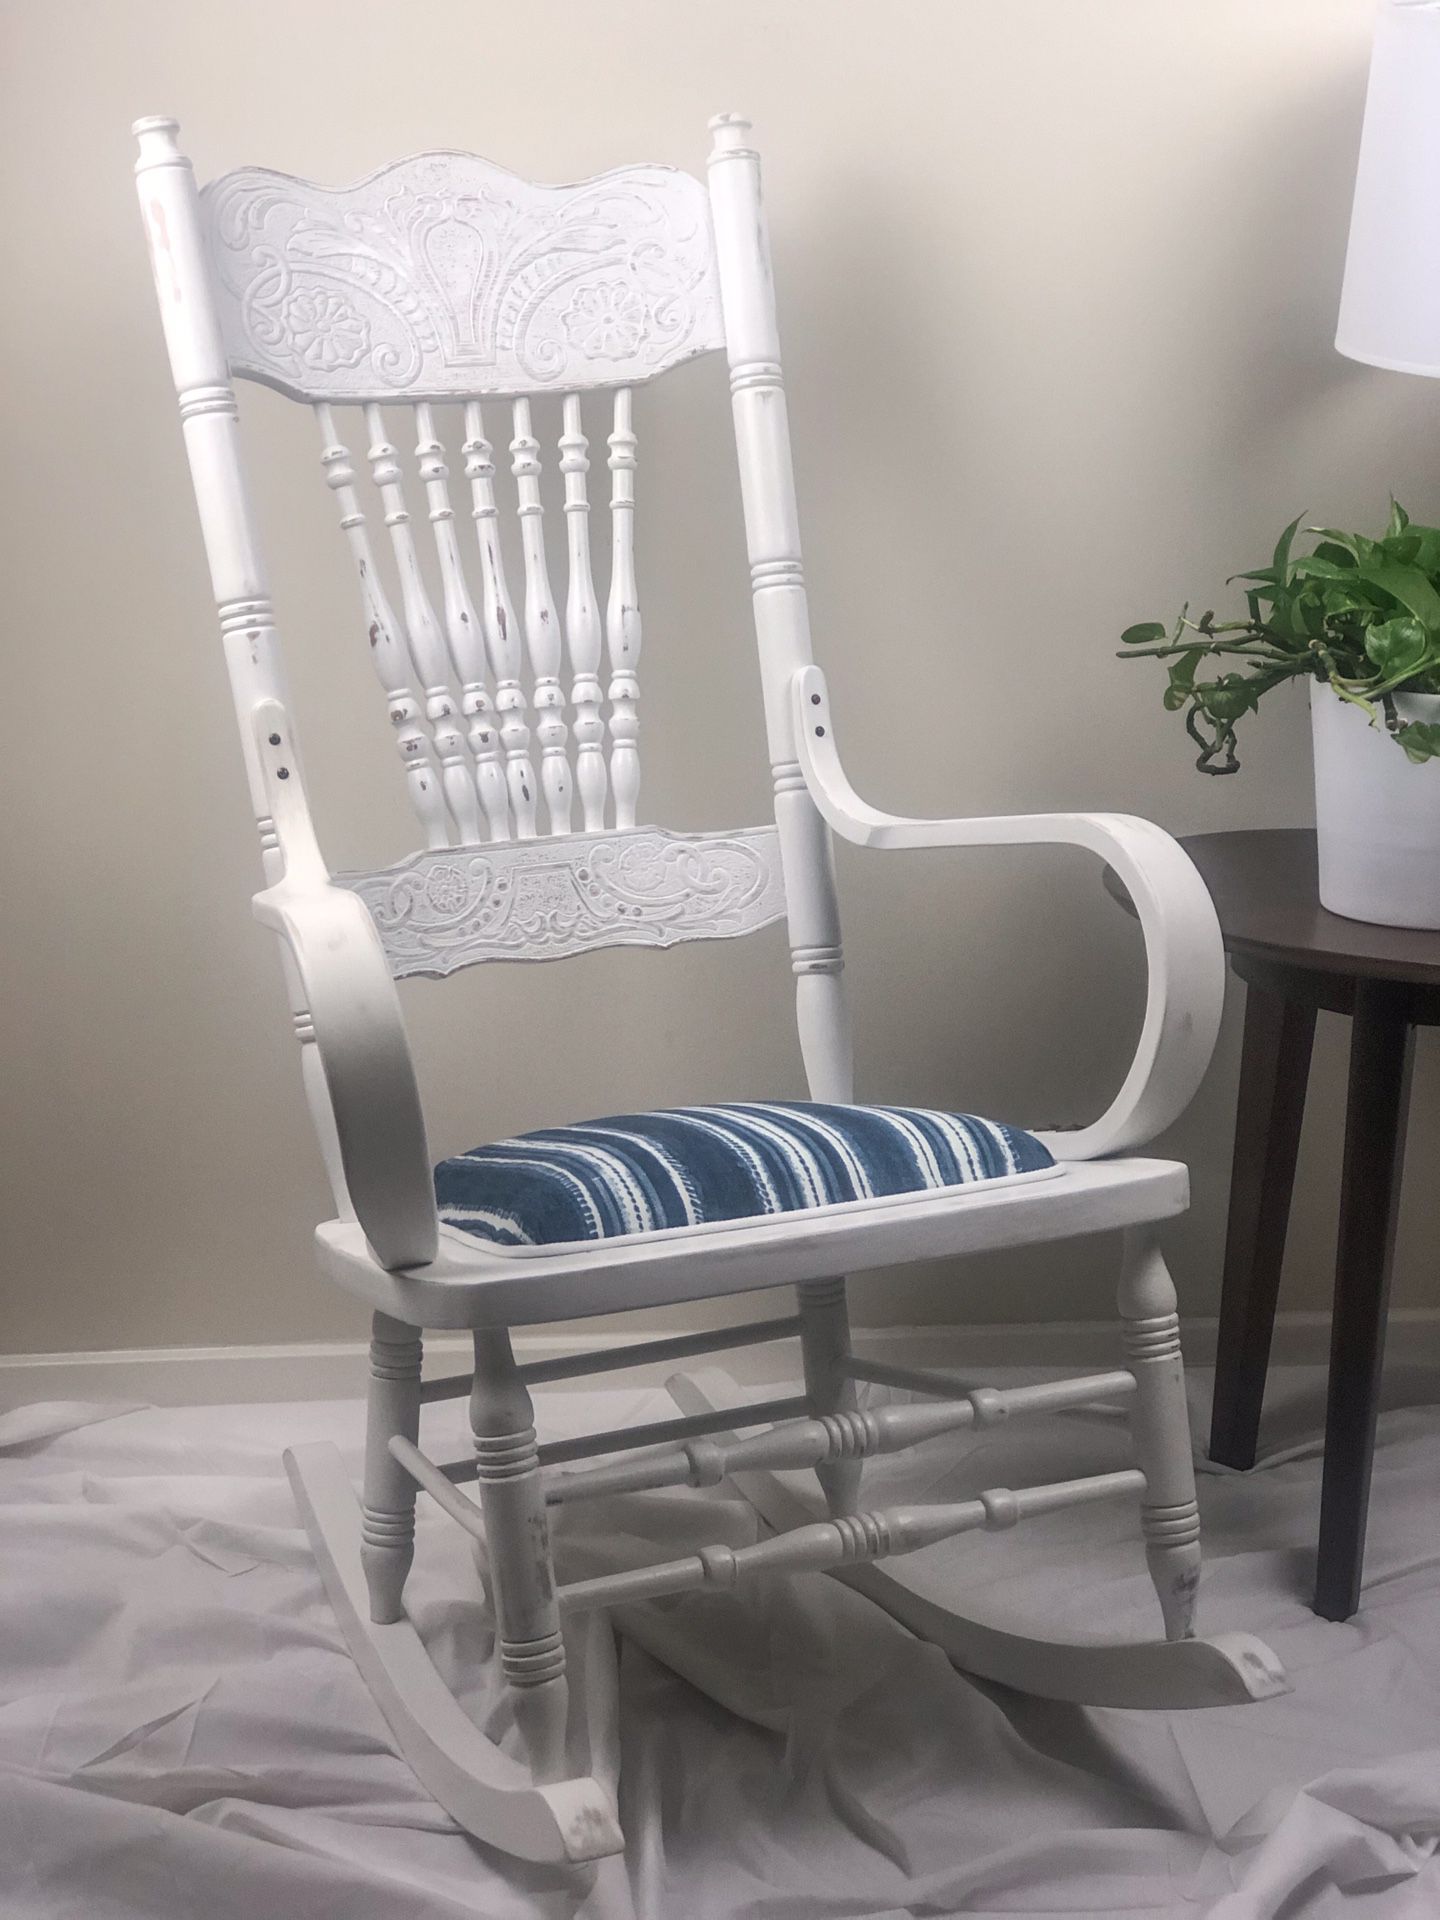 Refinished Vintage Rocking Chair